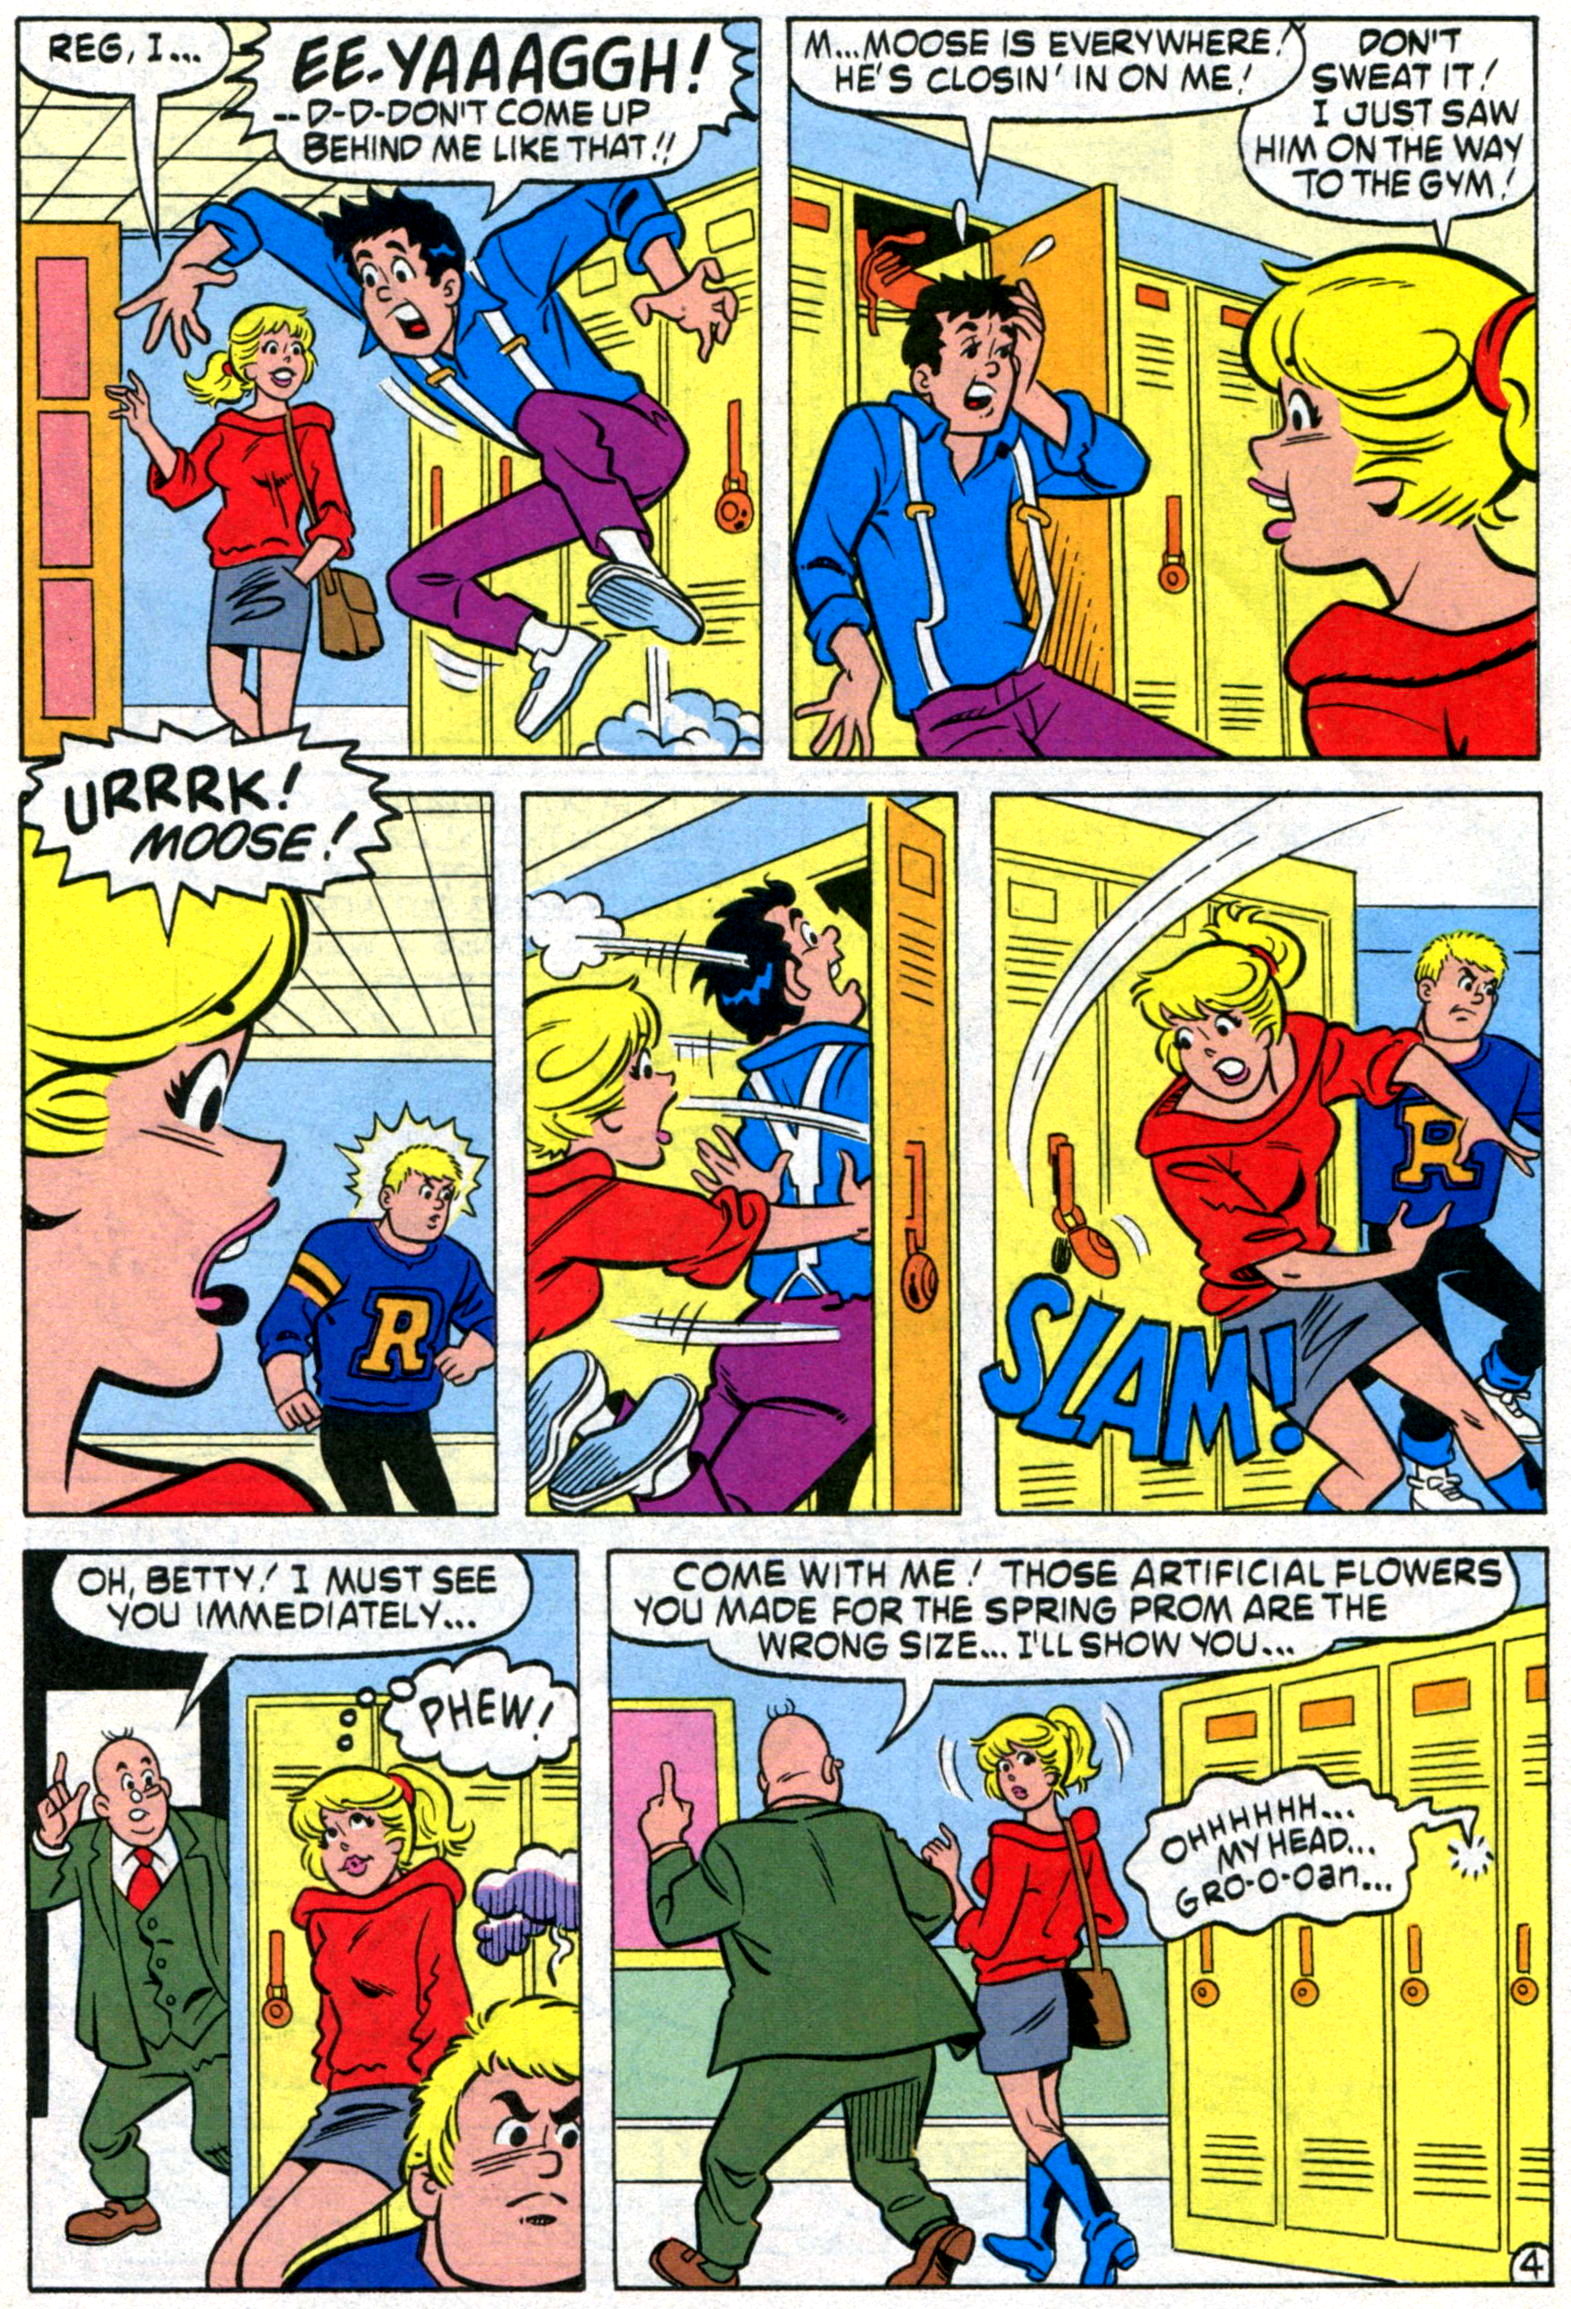 Read online Betty comic -  Issue #23 - 23